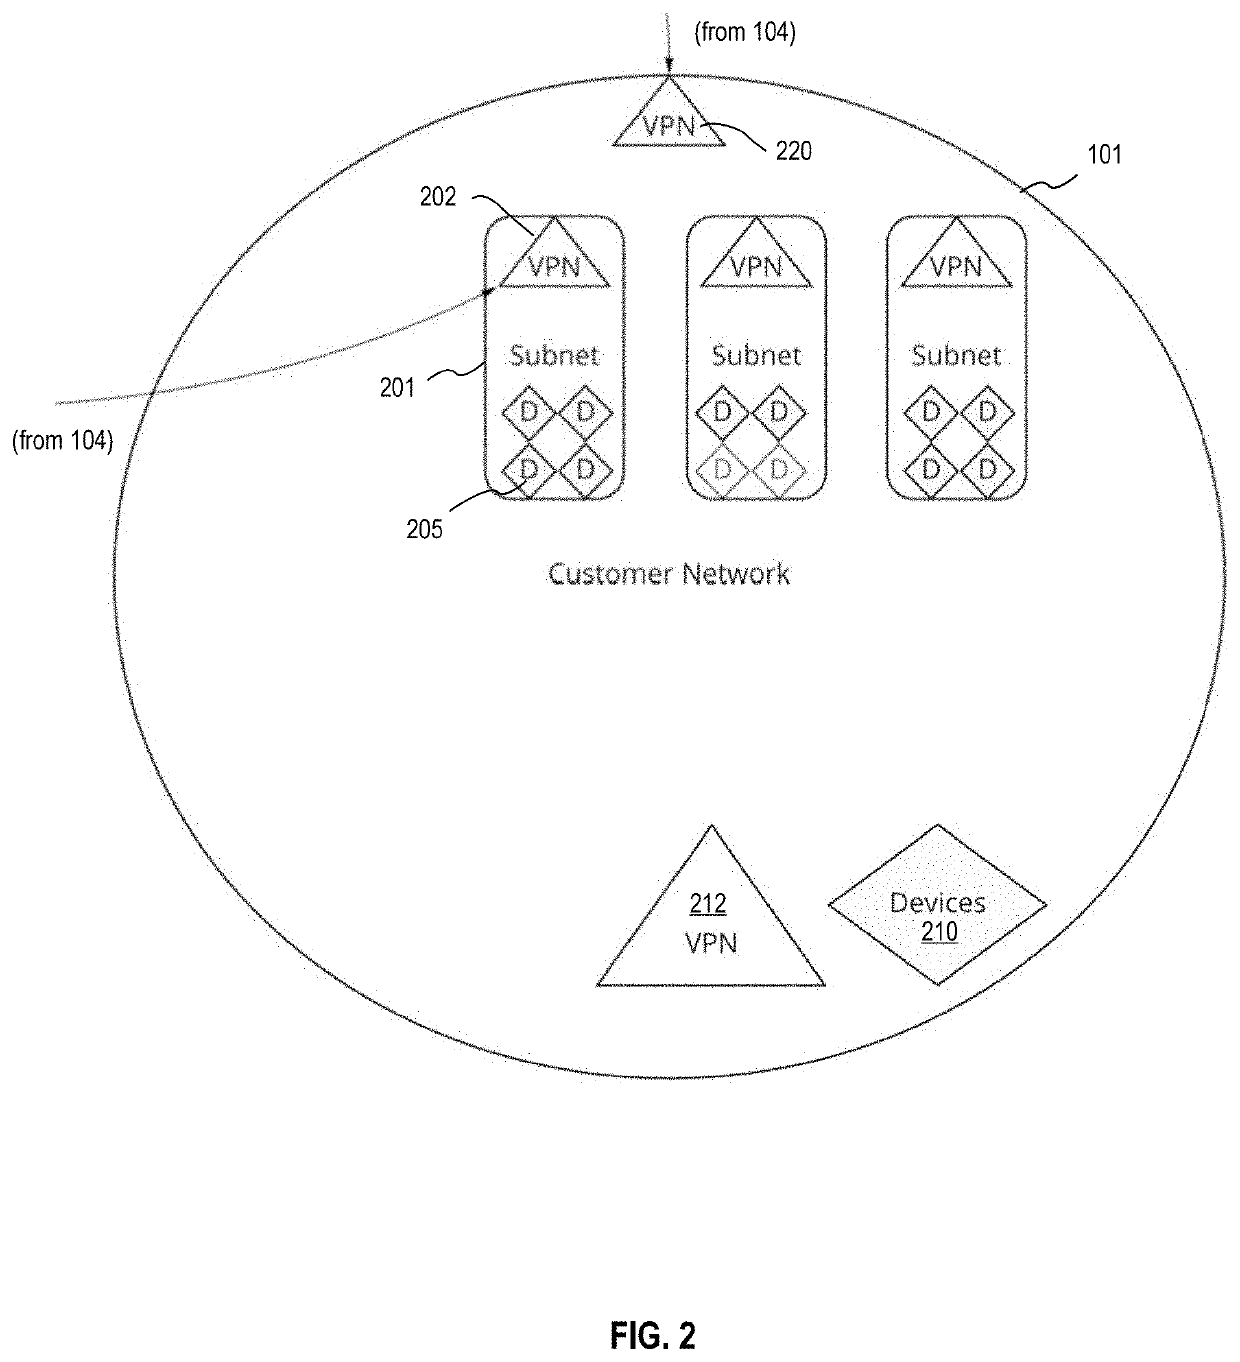 Systems and Methods for Improved Network Vulnerability Scanning and Reporting